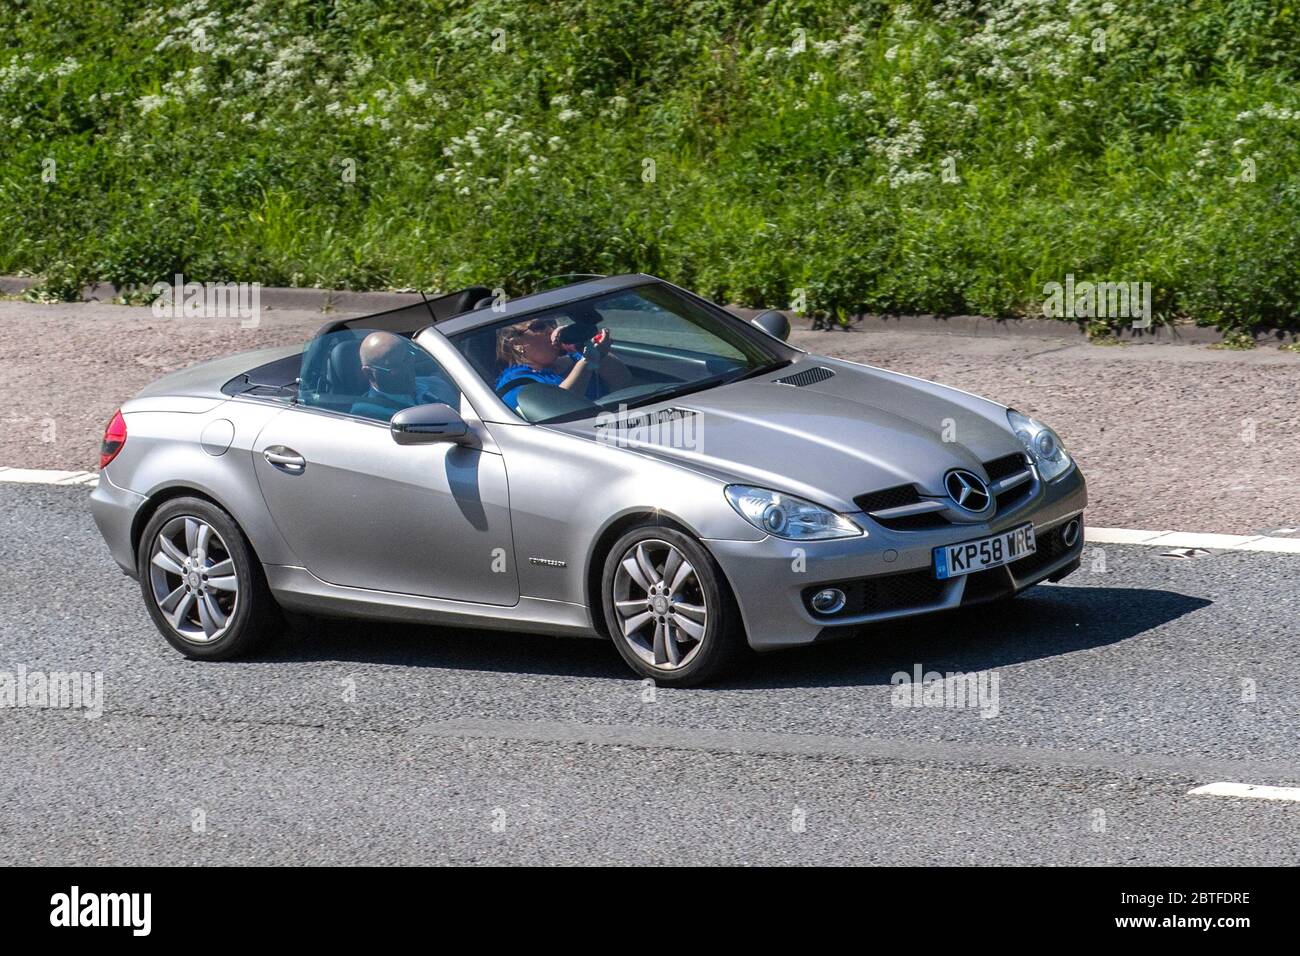 https://c8.alamy.com/comp/2BTFDRE/2008-silver-mercedes-slk-200-kompressor-auto-vehicular-traffic-moving-vehicles-convertible-convertibles-soft-top-open-topped-roadster-cabriolets-drop-tops-cars-driving-vehicle-on-uk-roads-motors-motoring-on-the-m61-motorway-highway-in-manchester-uk-2BTFDRE.jpg